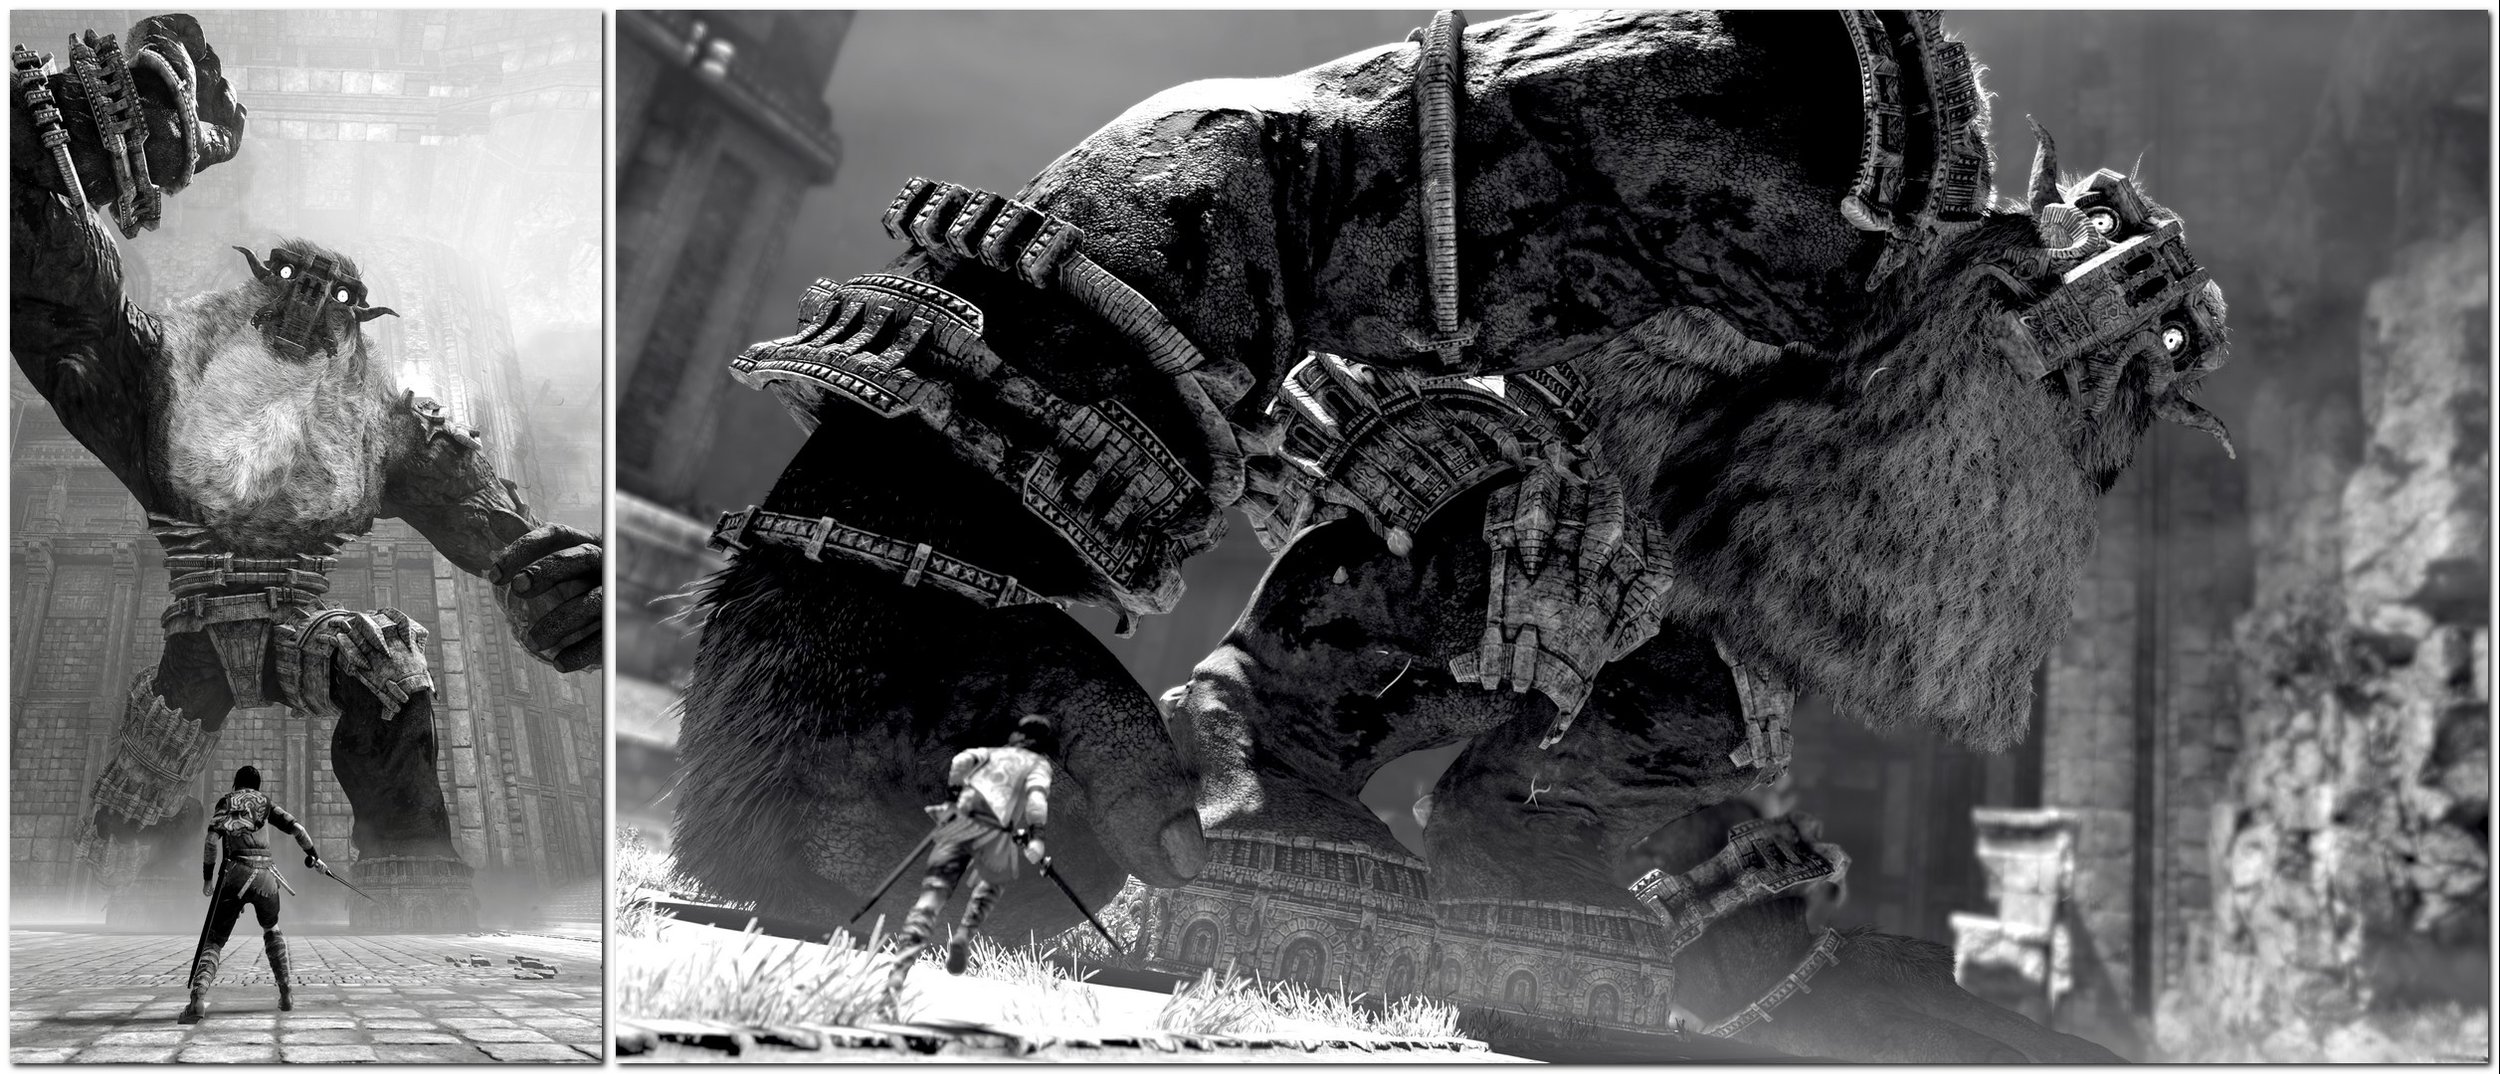 Shadow of the Colossus' vivid PS4 visuals come at the cost of the  original's bleakness